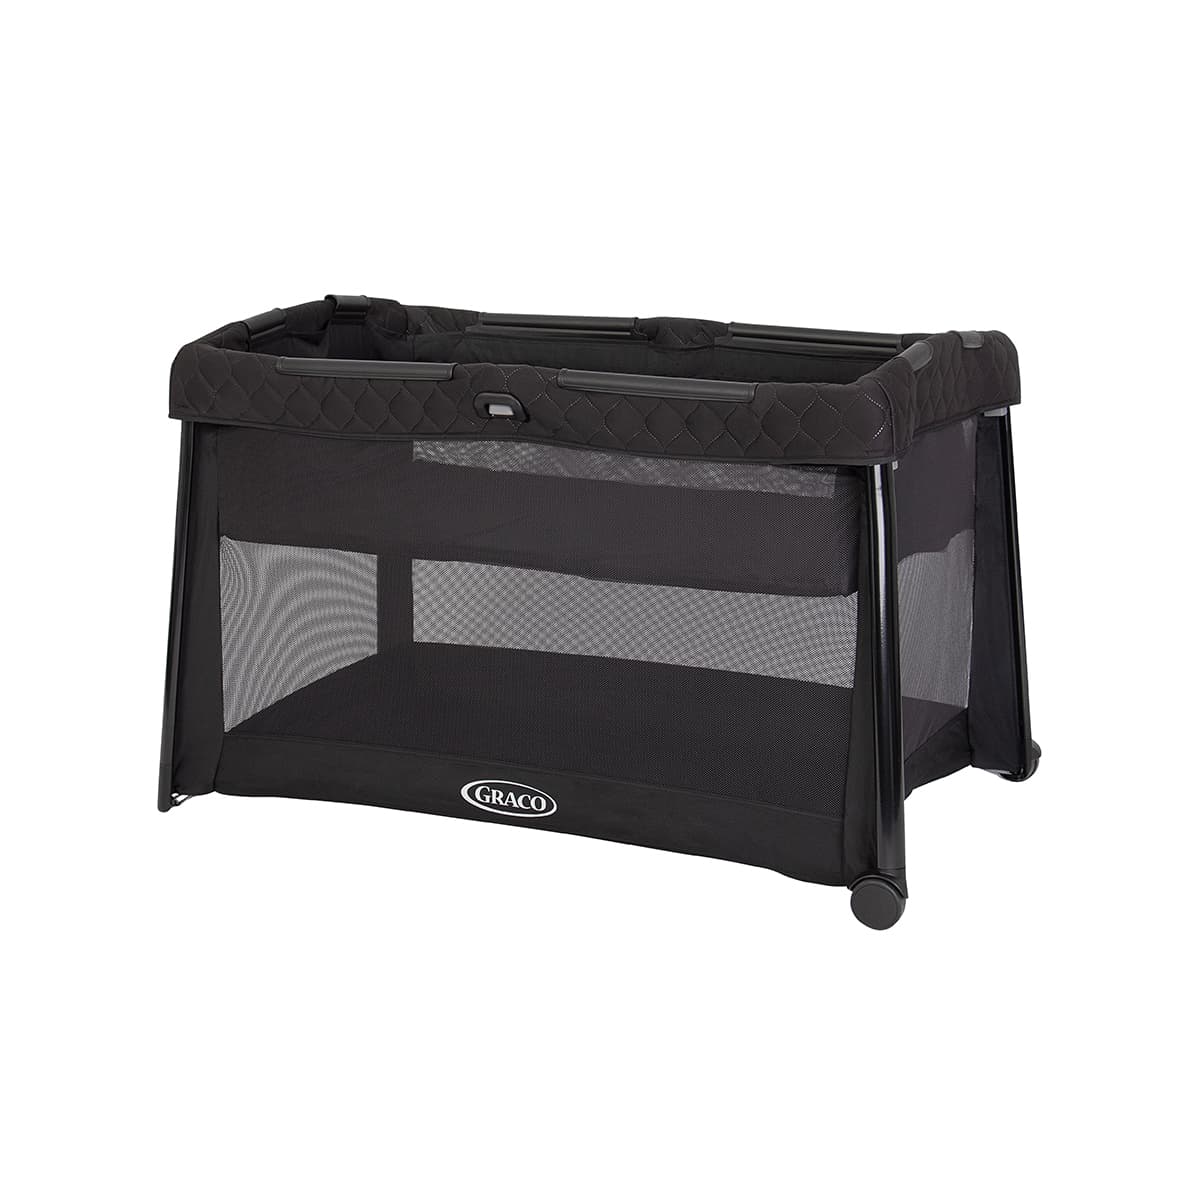 Graco FoldLite LX Travel Cot with Bassinet in travel cot mode three quarter angle on white background.
